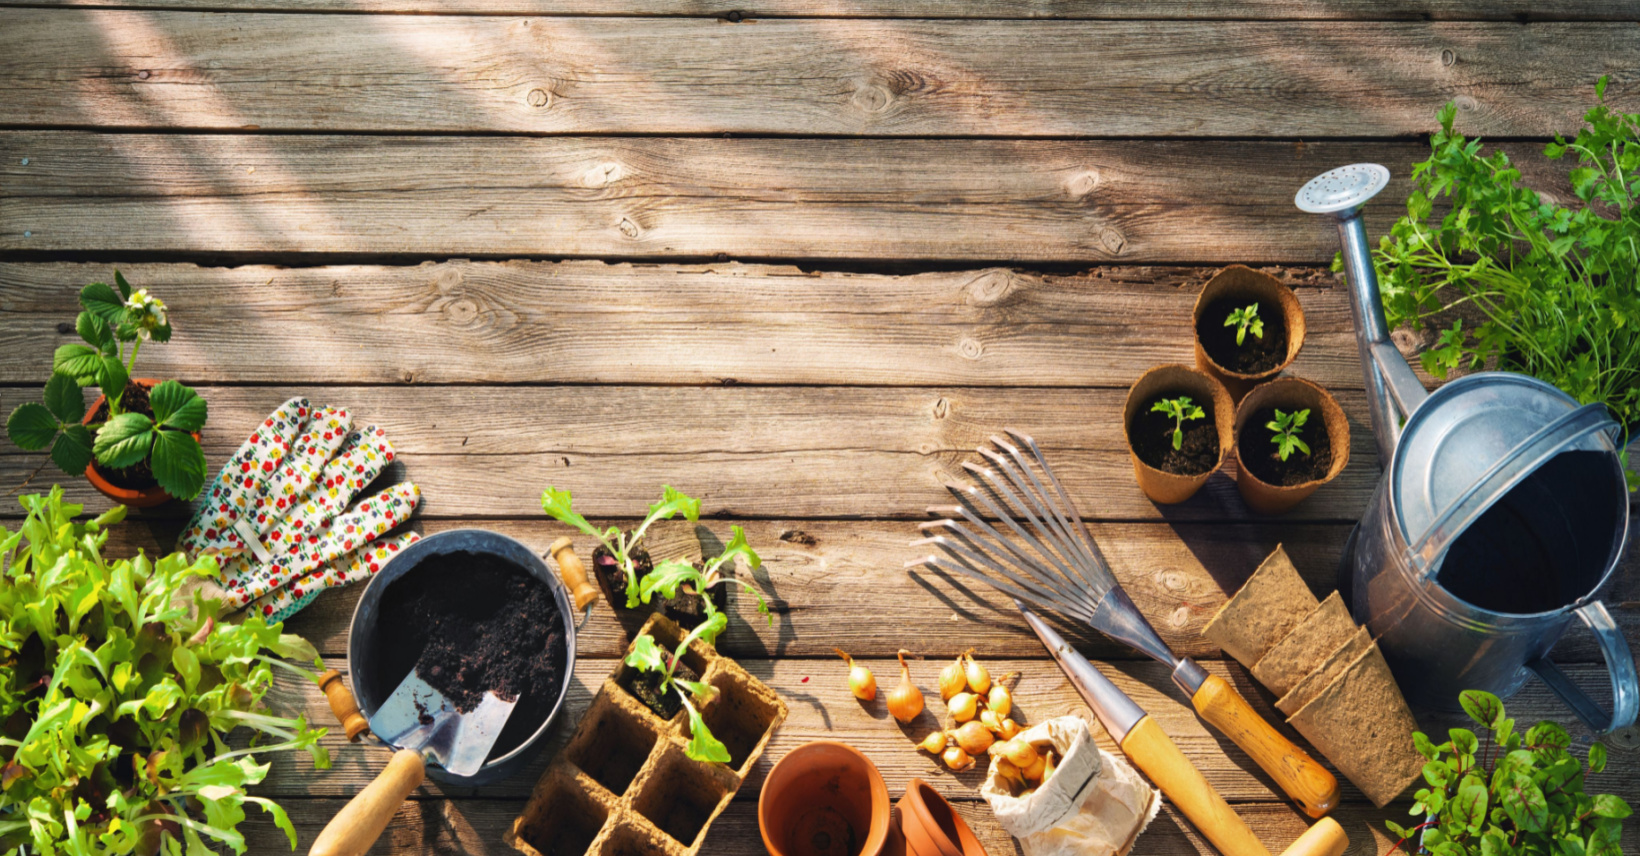 Cheap Gardening Ideas When You’re Trying to Budget